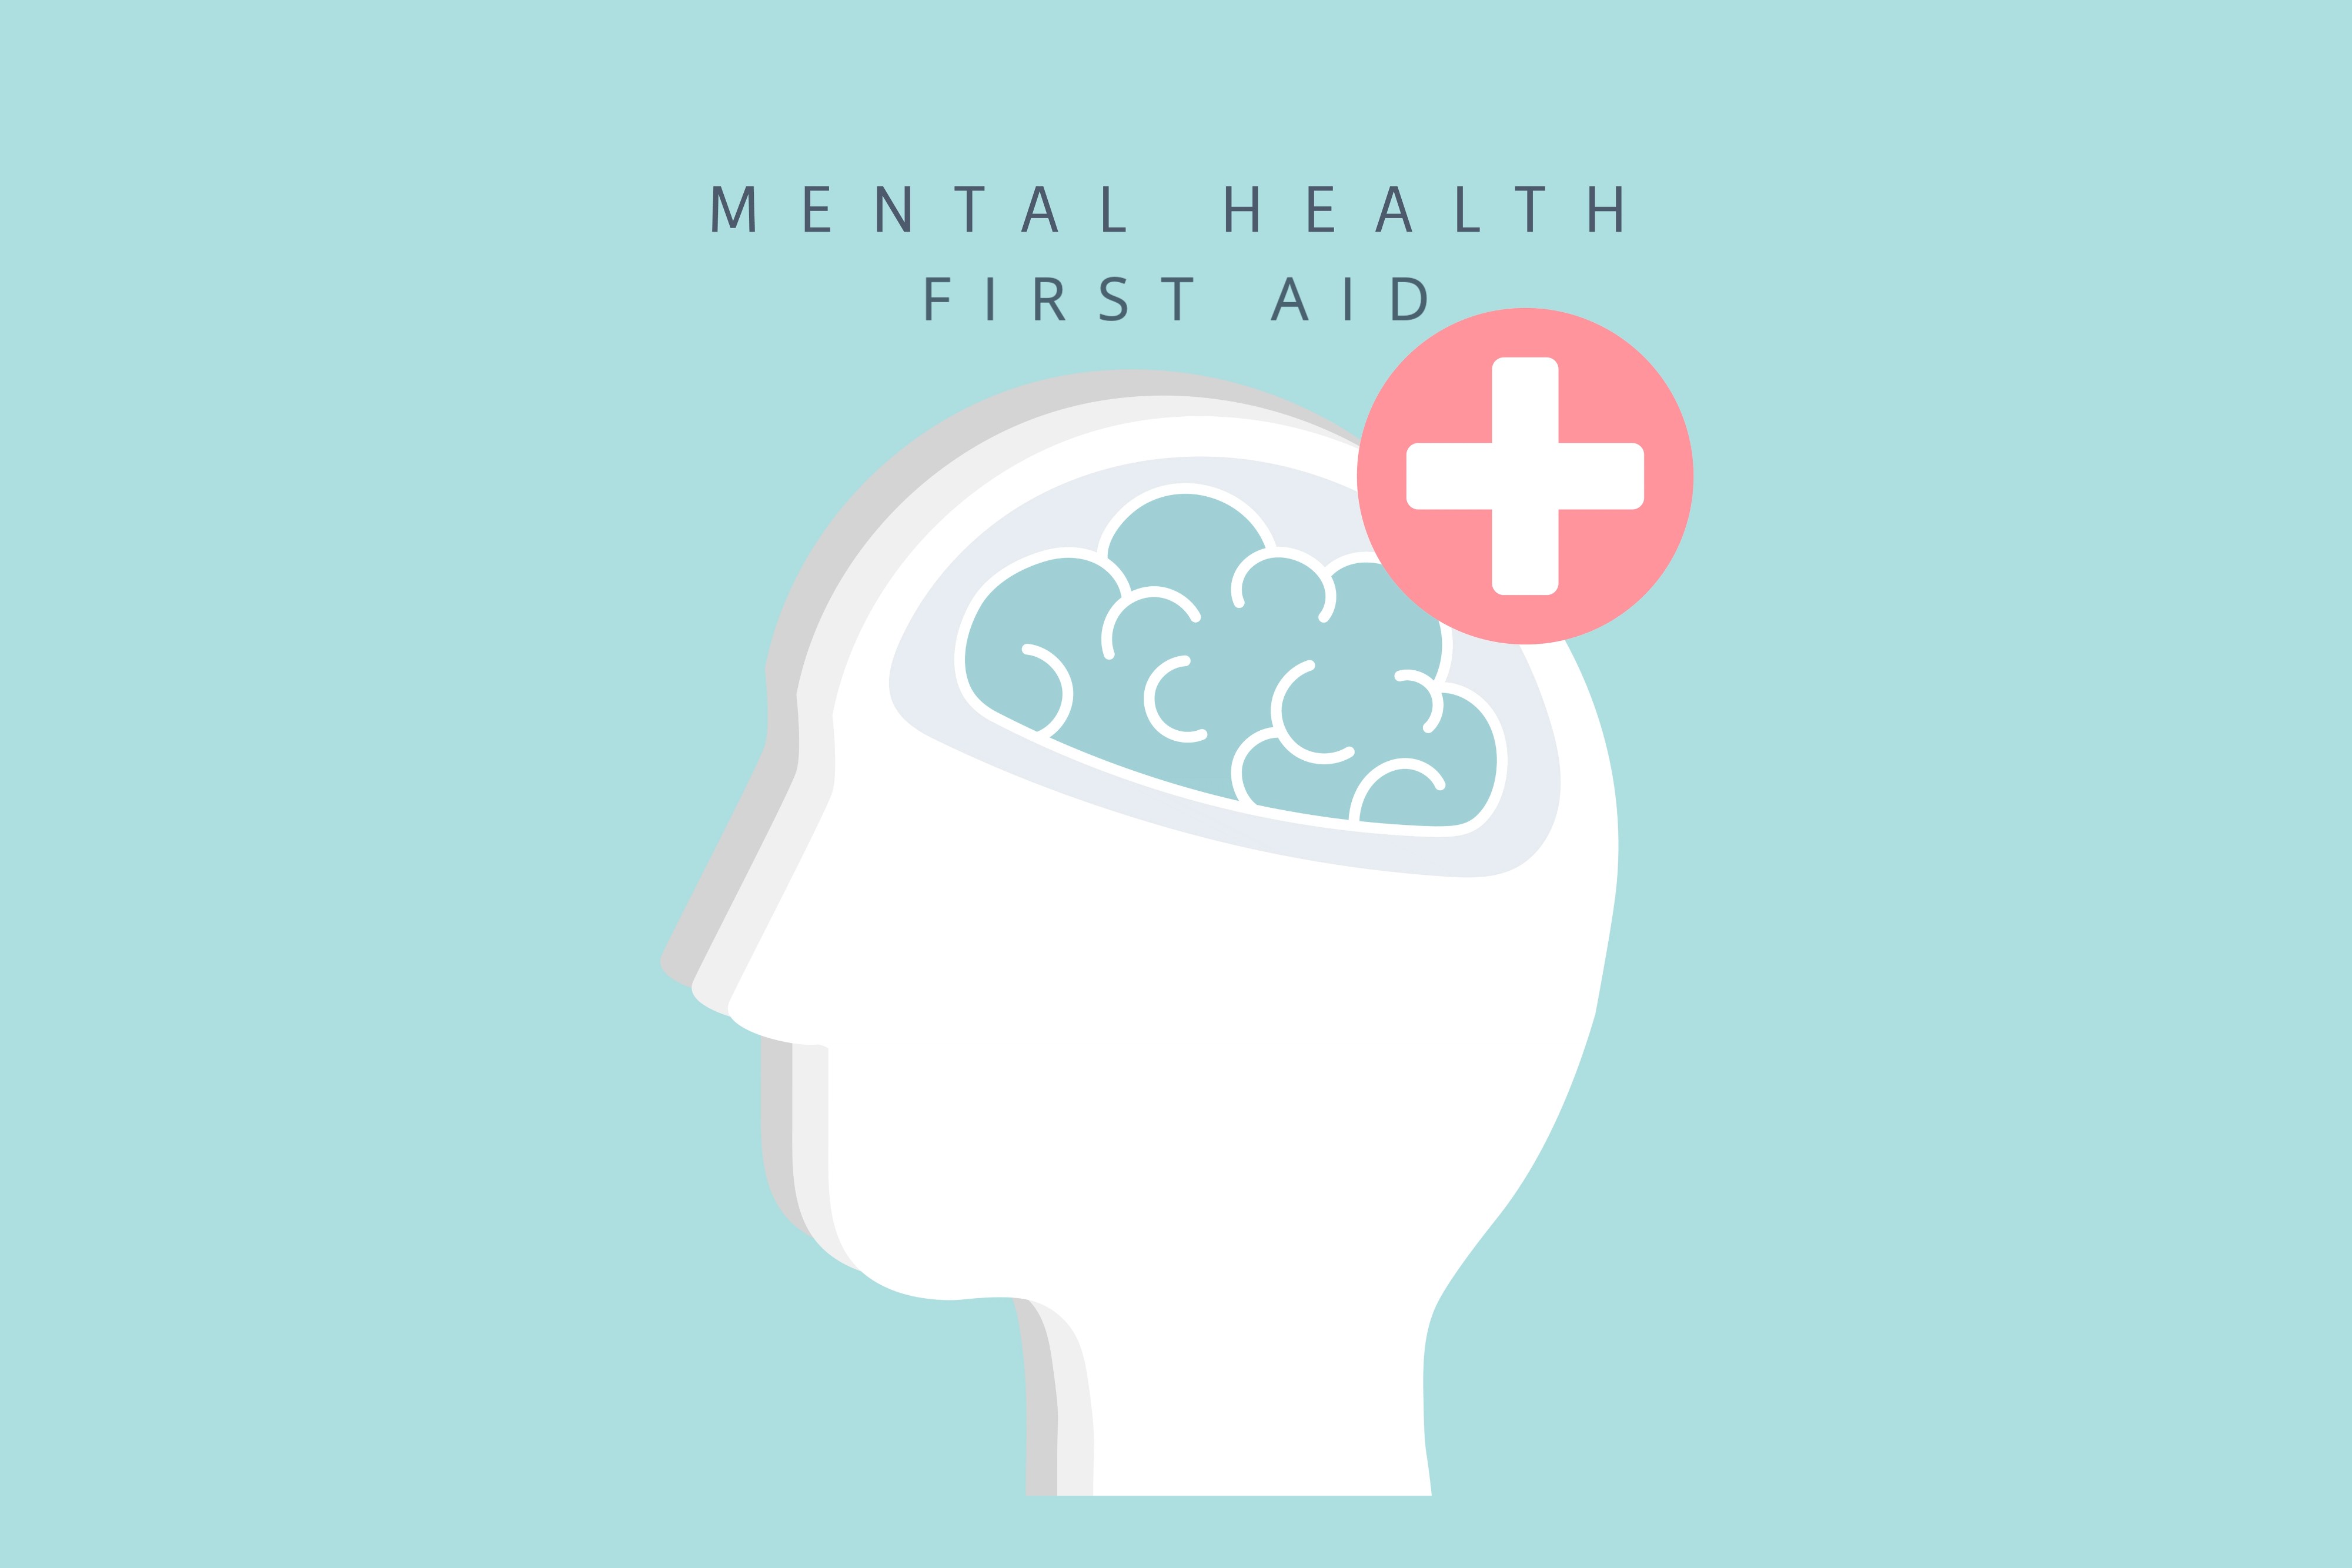 Mental Health First Aid Blended Face-to-Face Course Perth